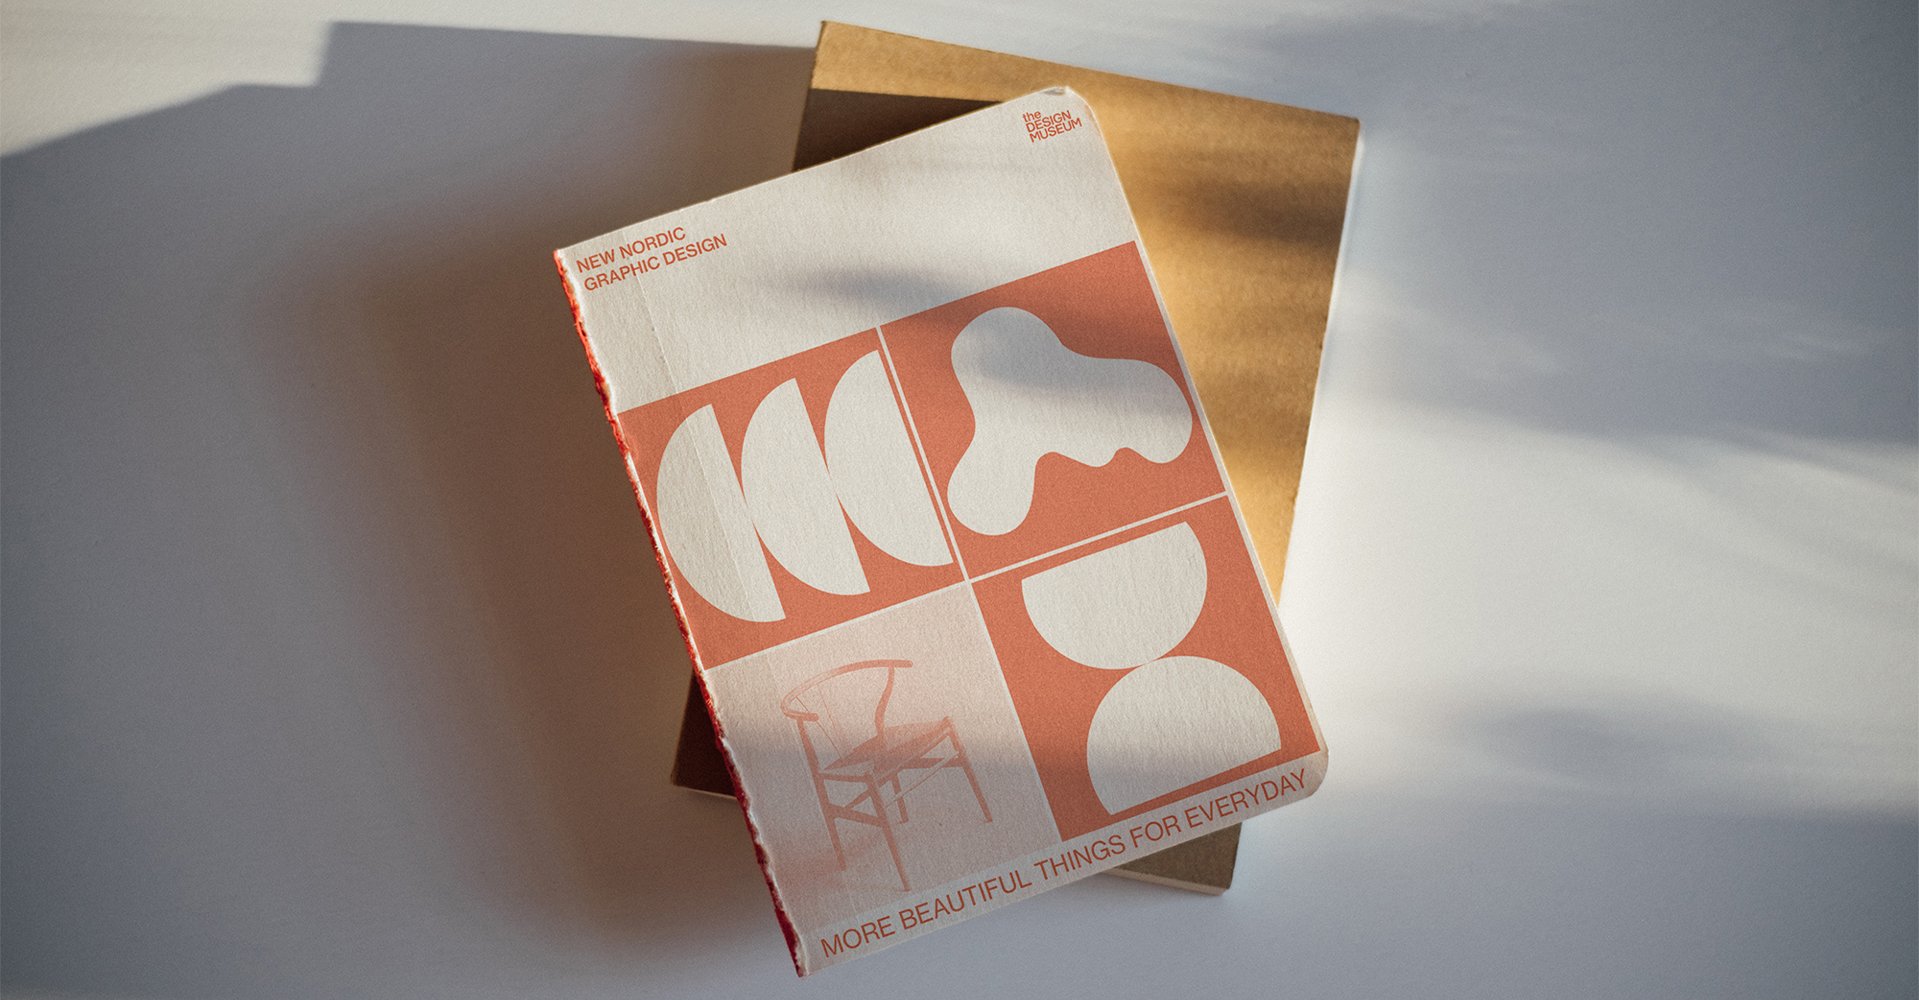 More beautiful things for everyday life / Editorial Design / Exhibition Catalogue